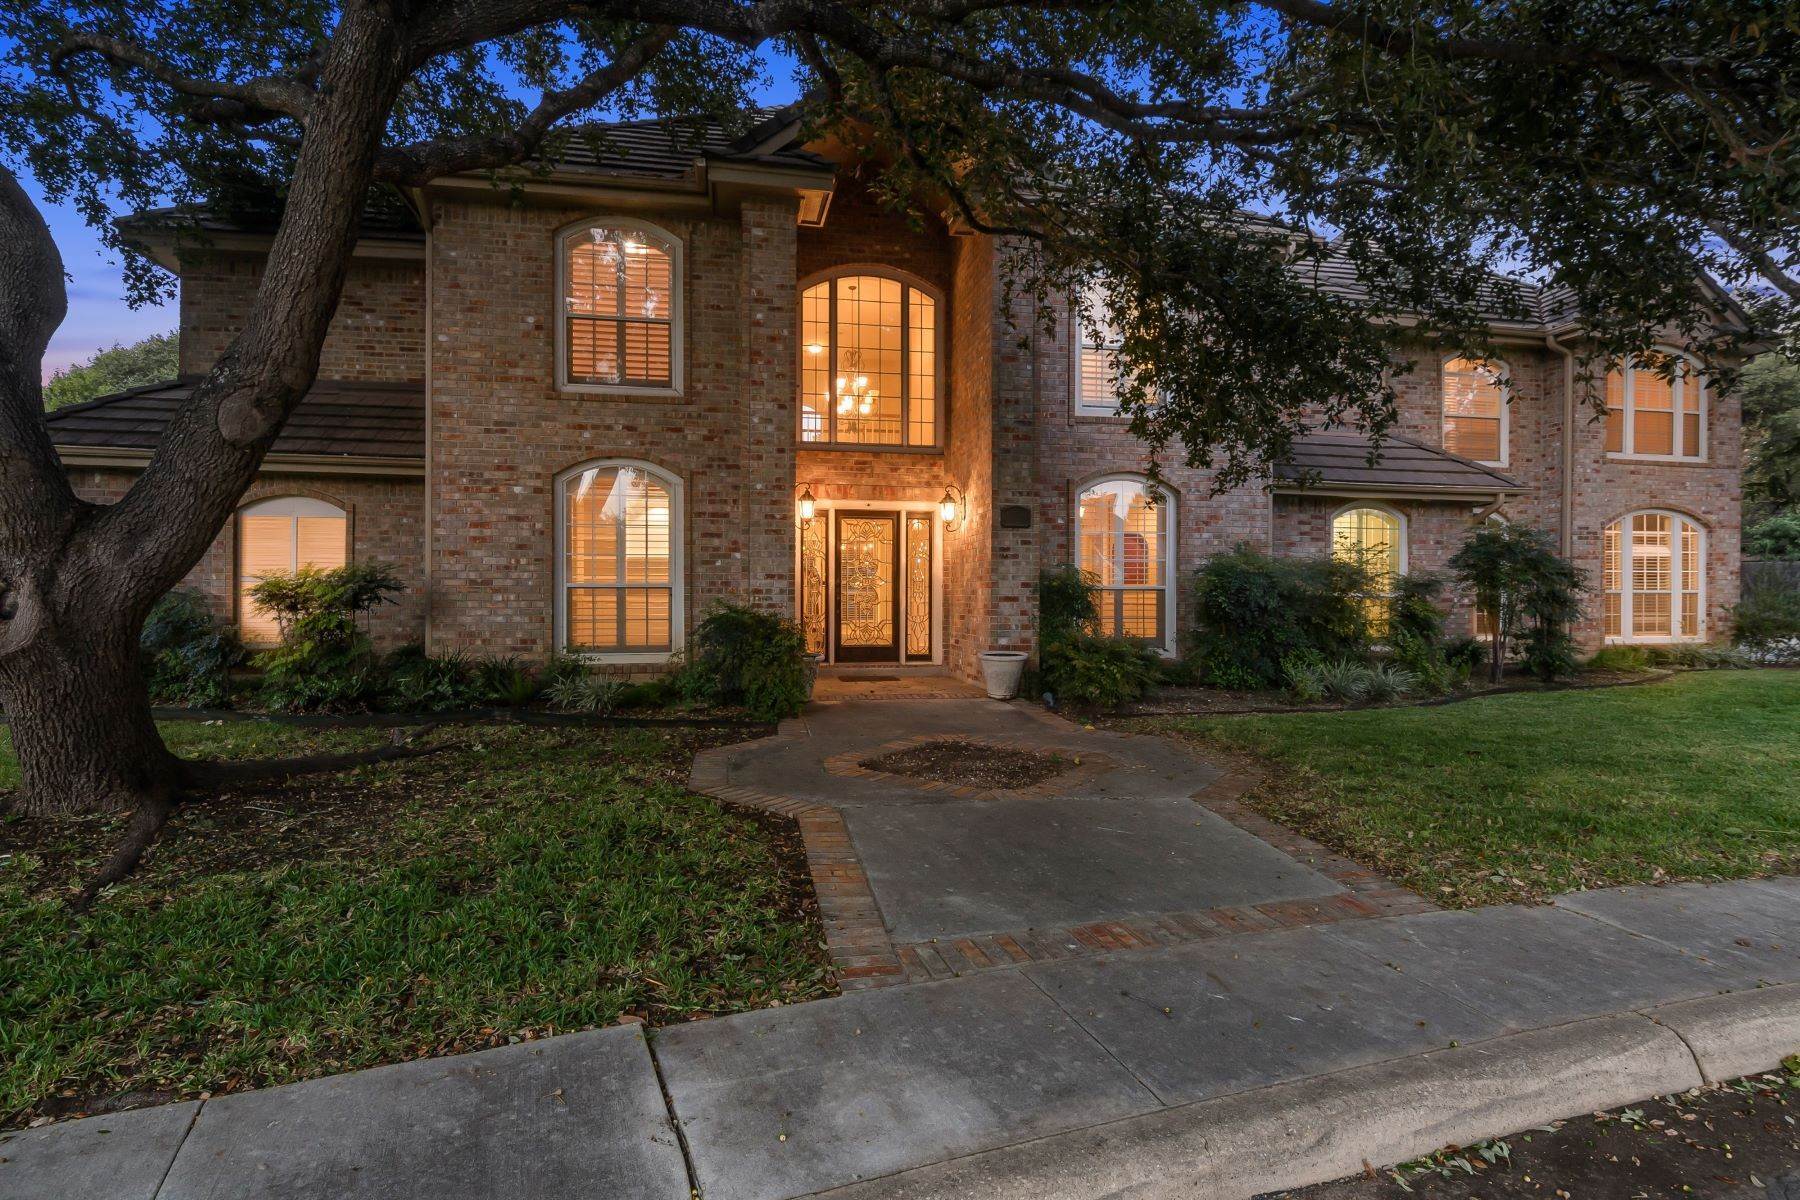 Single Family Homes for Sale at 7 Bowood Court, San Antonio, TX 78218 7 Bowood Court San Antonio, Texas 78218 United States